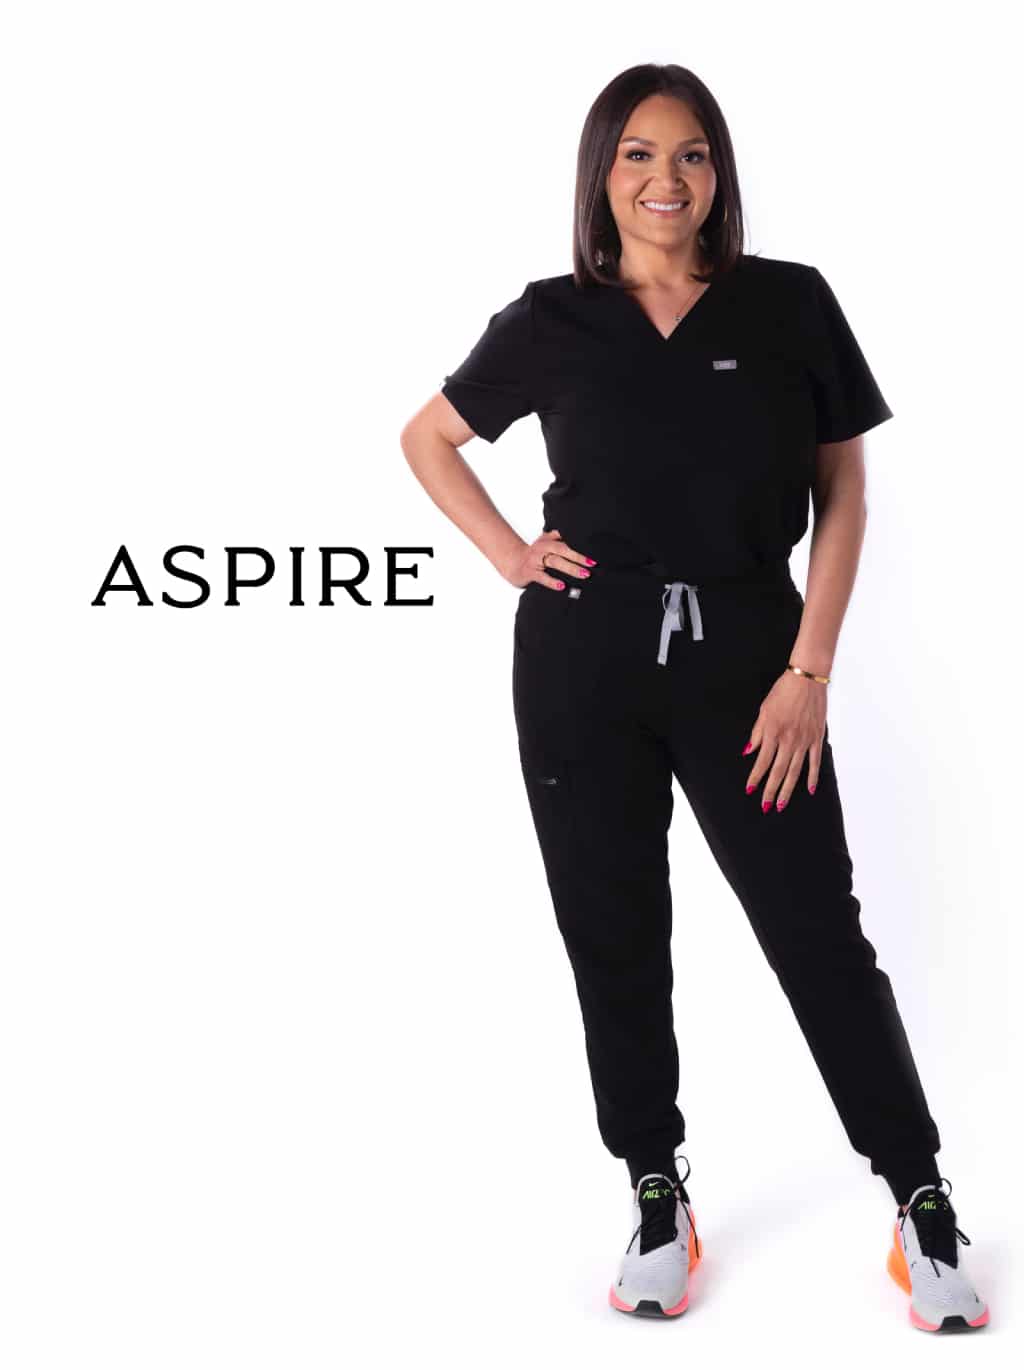 Amber | Our Team | Aspire Aesthetics and Wellness